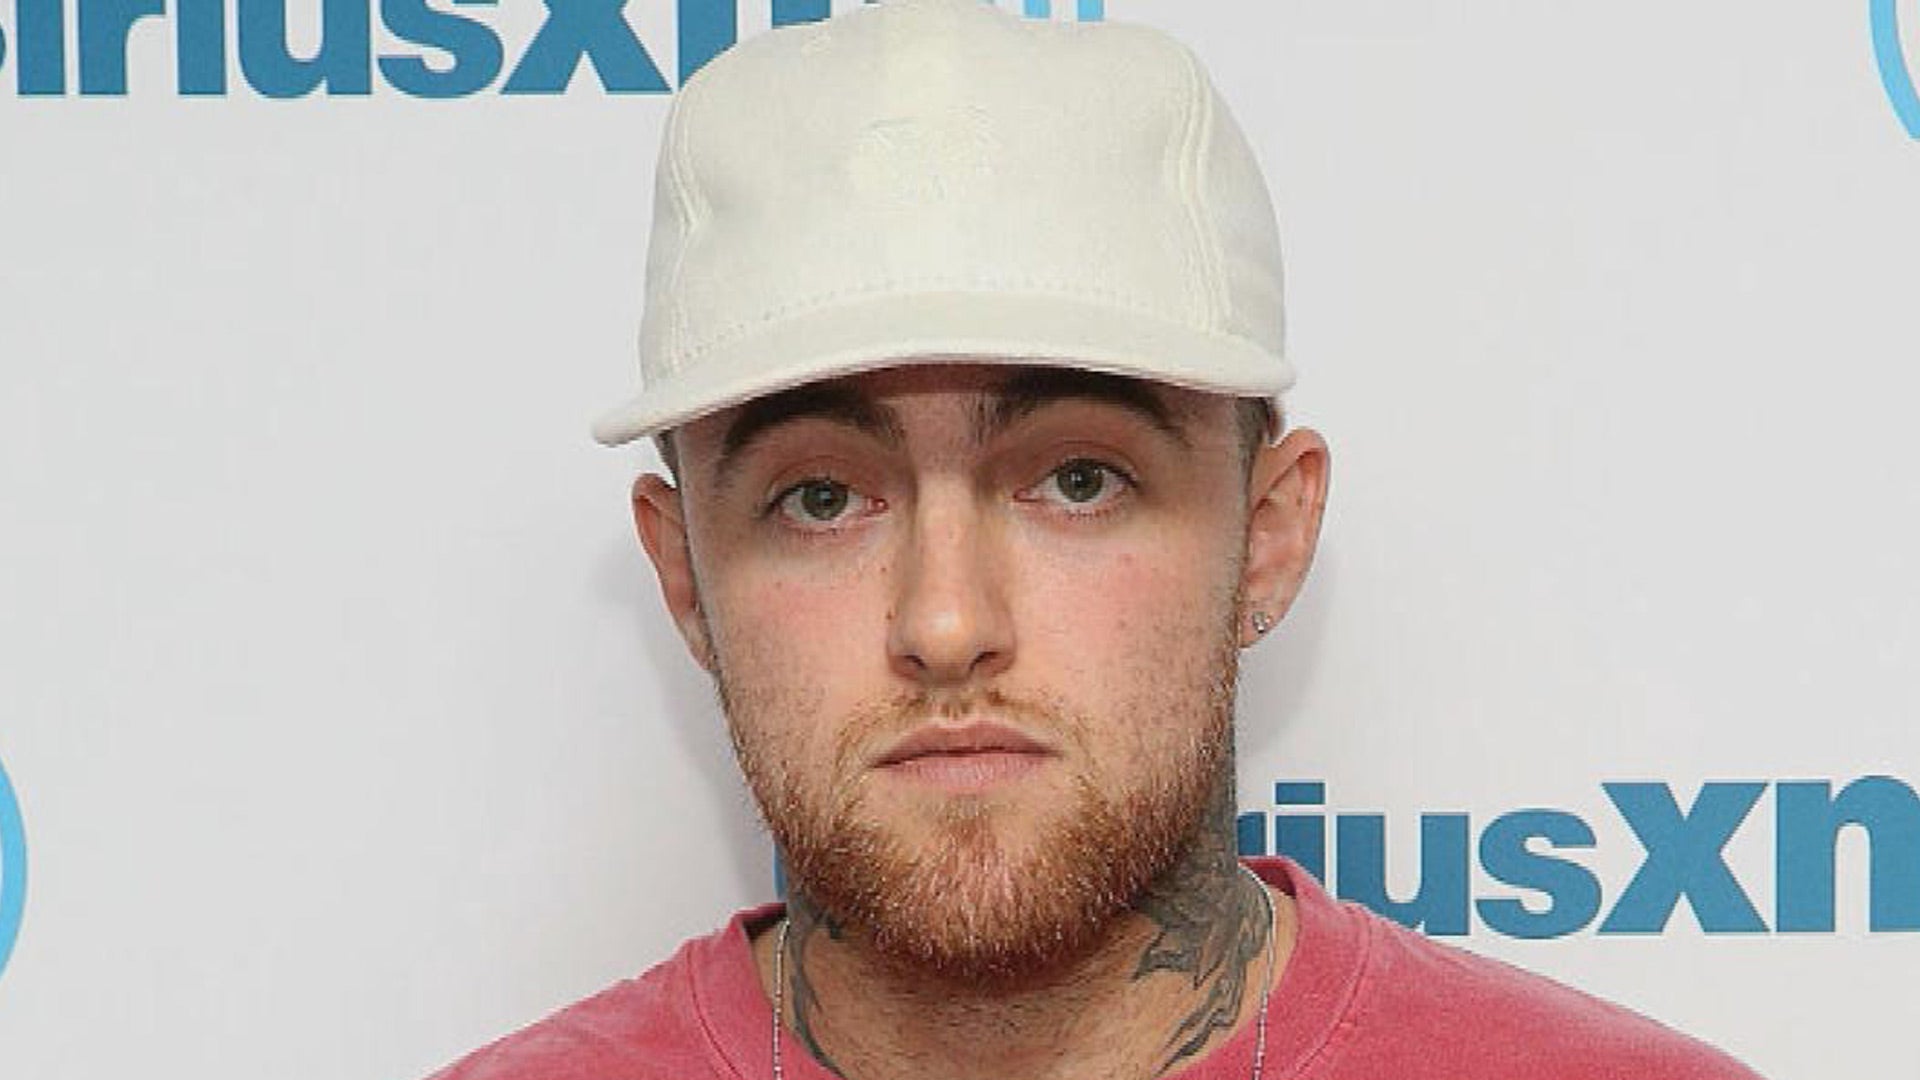 Mac Miller faced legal battle days before shock death from